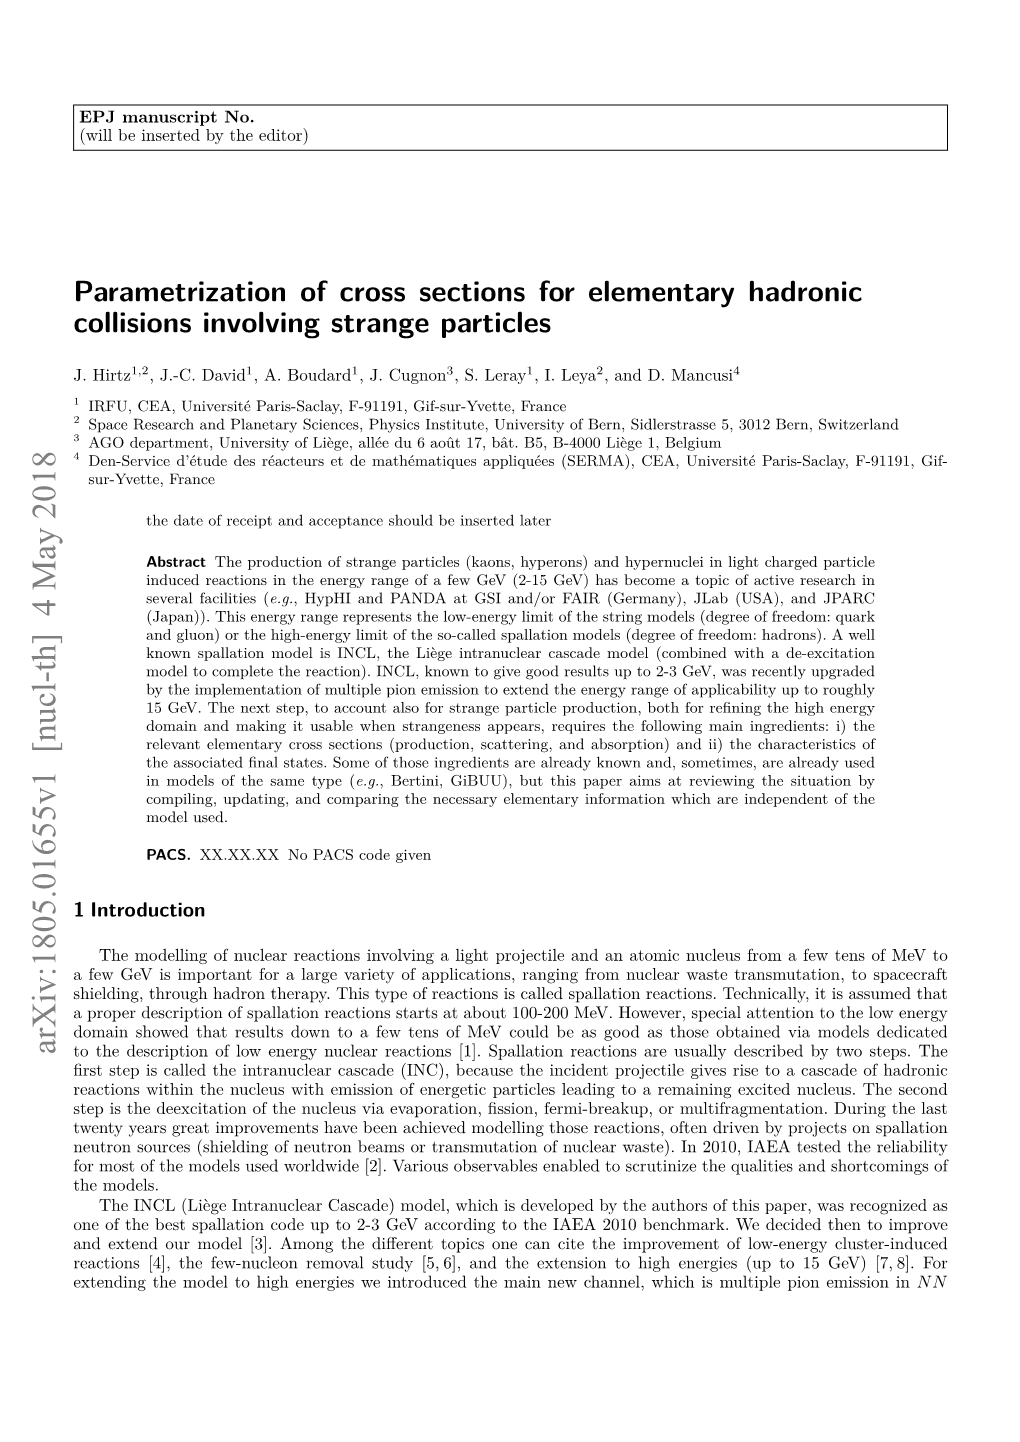 Parametrization of Cross Sections for Elementary Hadronic Collisions Involving Strange Particles